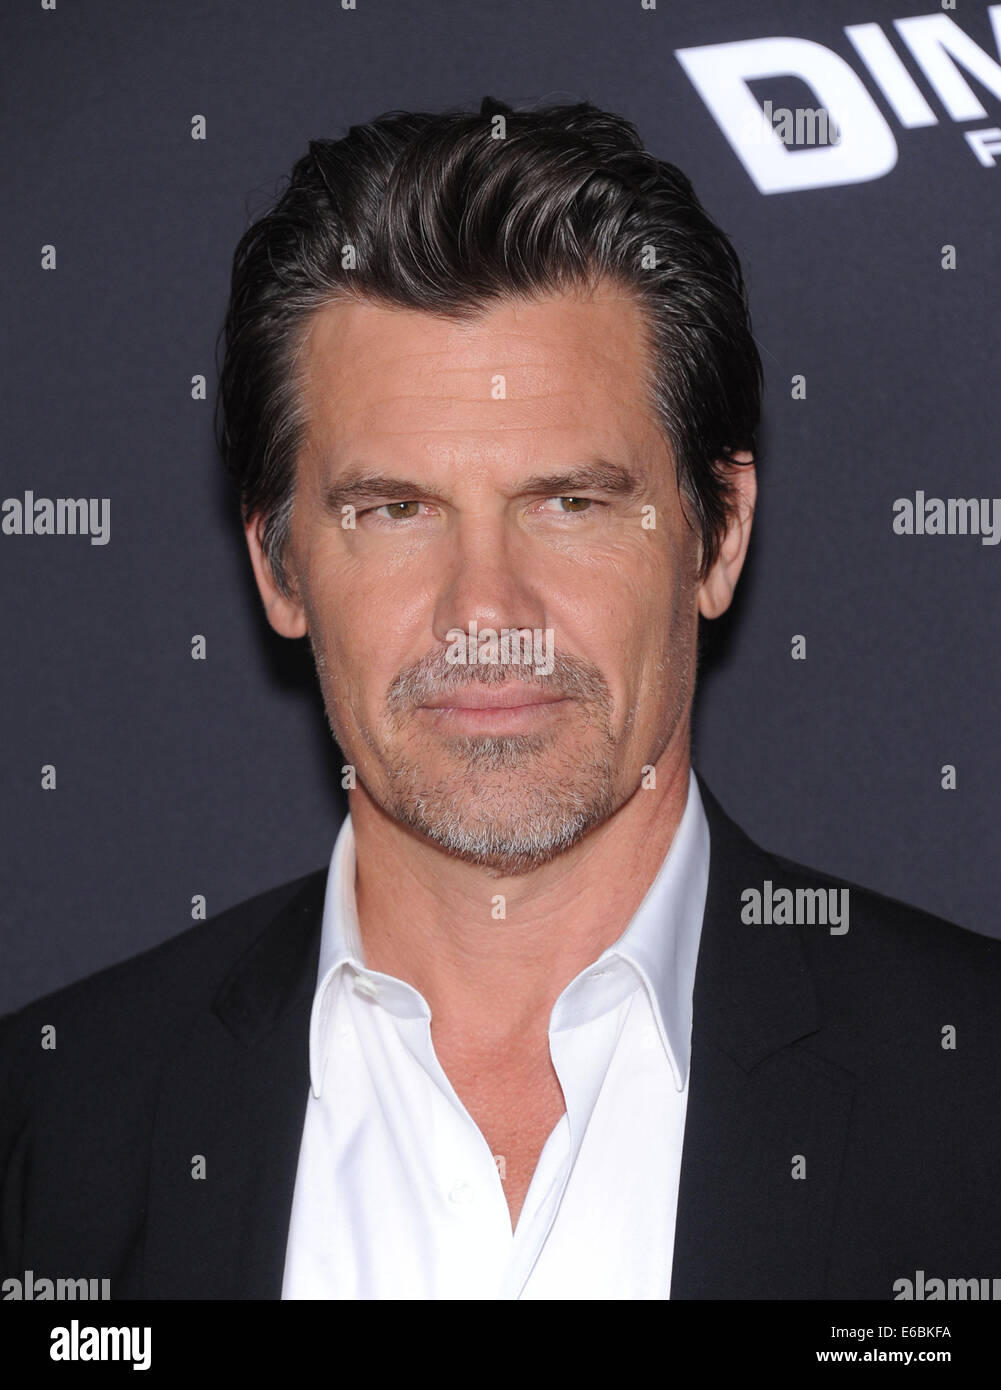 Hollywood, California, USA. 19th Aug, 2014. Josh Brolin arrives for the premiere of the film ''Sin City: A Dame To Kill For'' at the Chinese theater. Credit:  Lisa O'Connor/ZUMA Wire/Alamy Live News Stock Photo